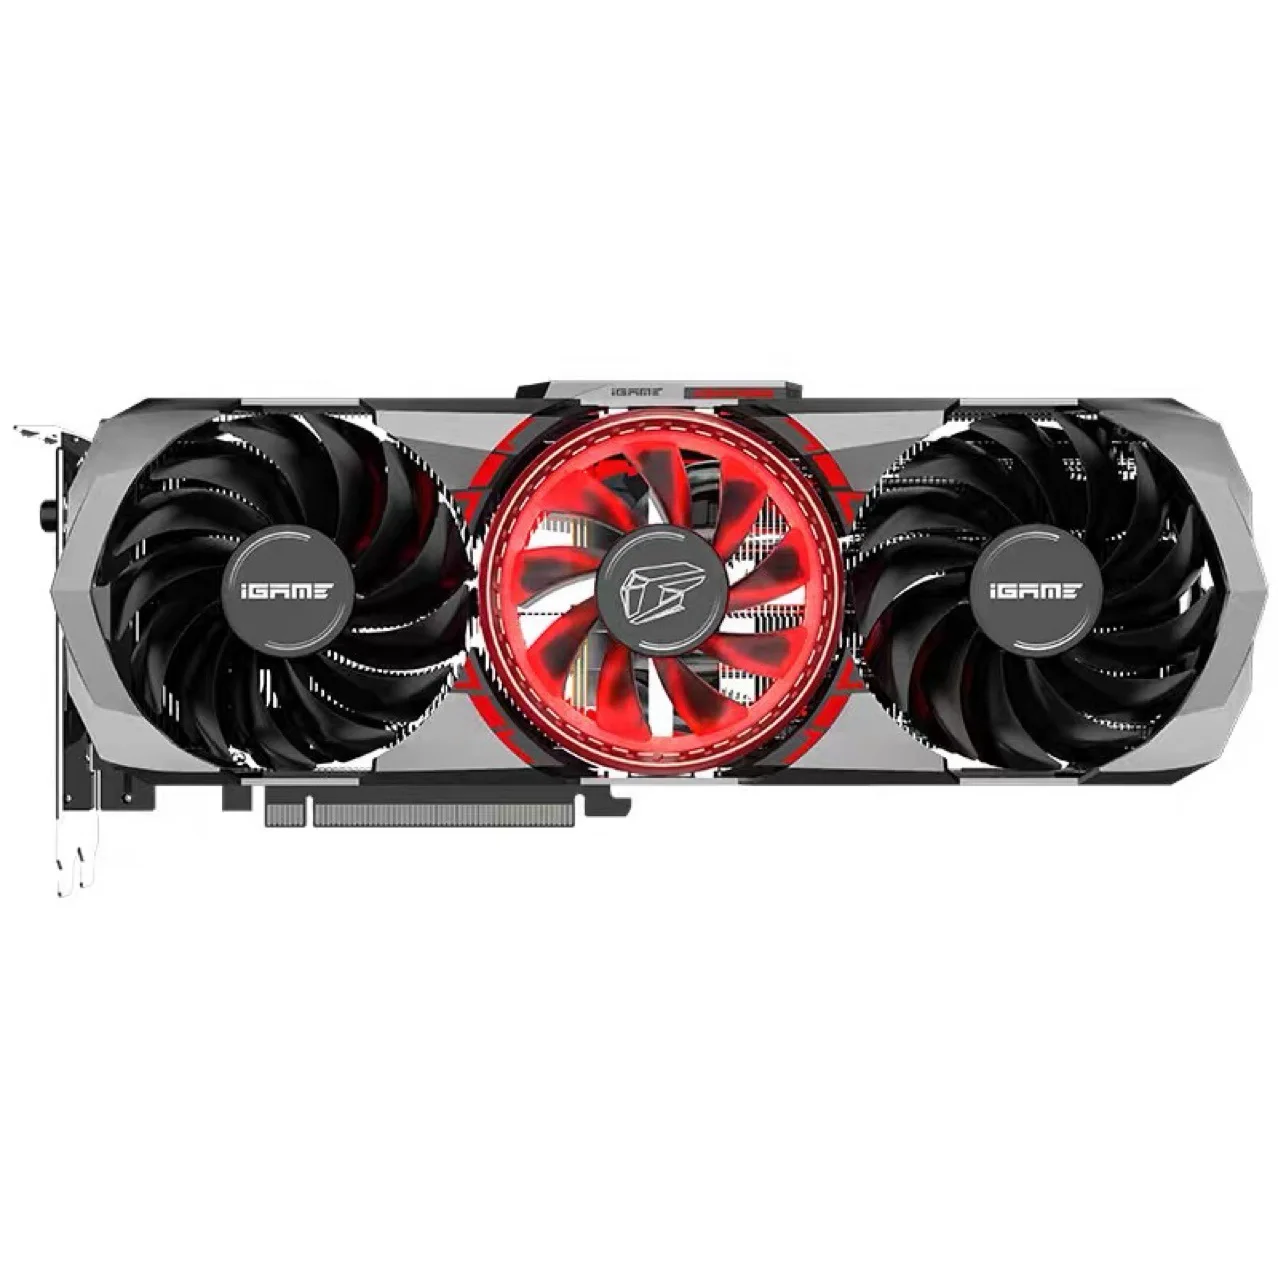 Colorful igame 3070. Colorful IGAME RTX 3080 ti Advanced OC-V вентиляторы. IGAME RTX 3070 ti. Colorful GEFORCE RTX 3090 24 ГБ (IGAME GEFORCE RTX 3090 Advanced OC 24 GB-V). IGAME 3070ti.